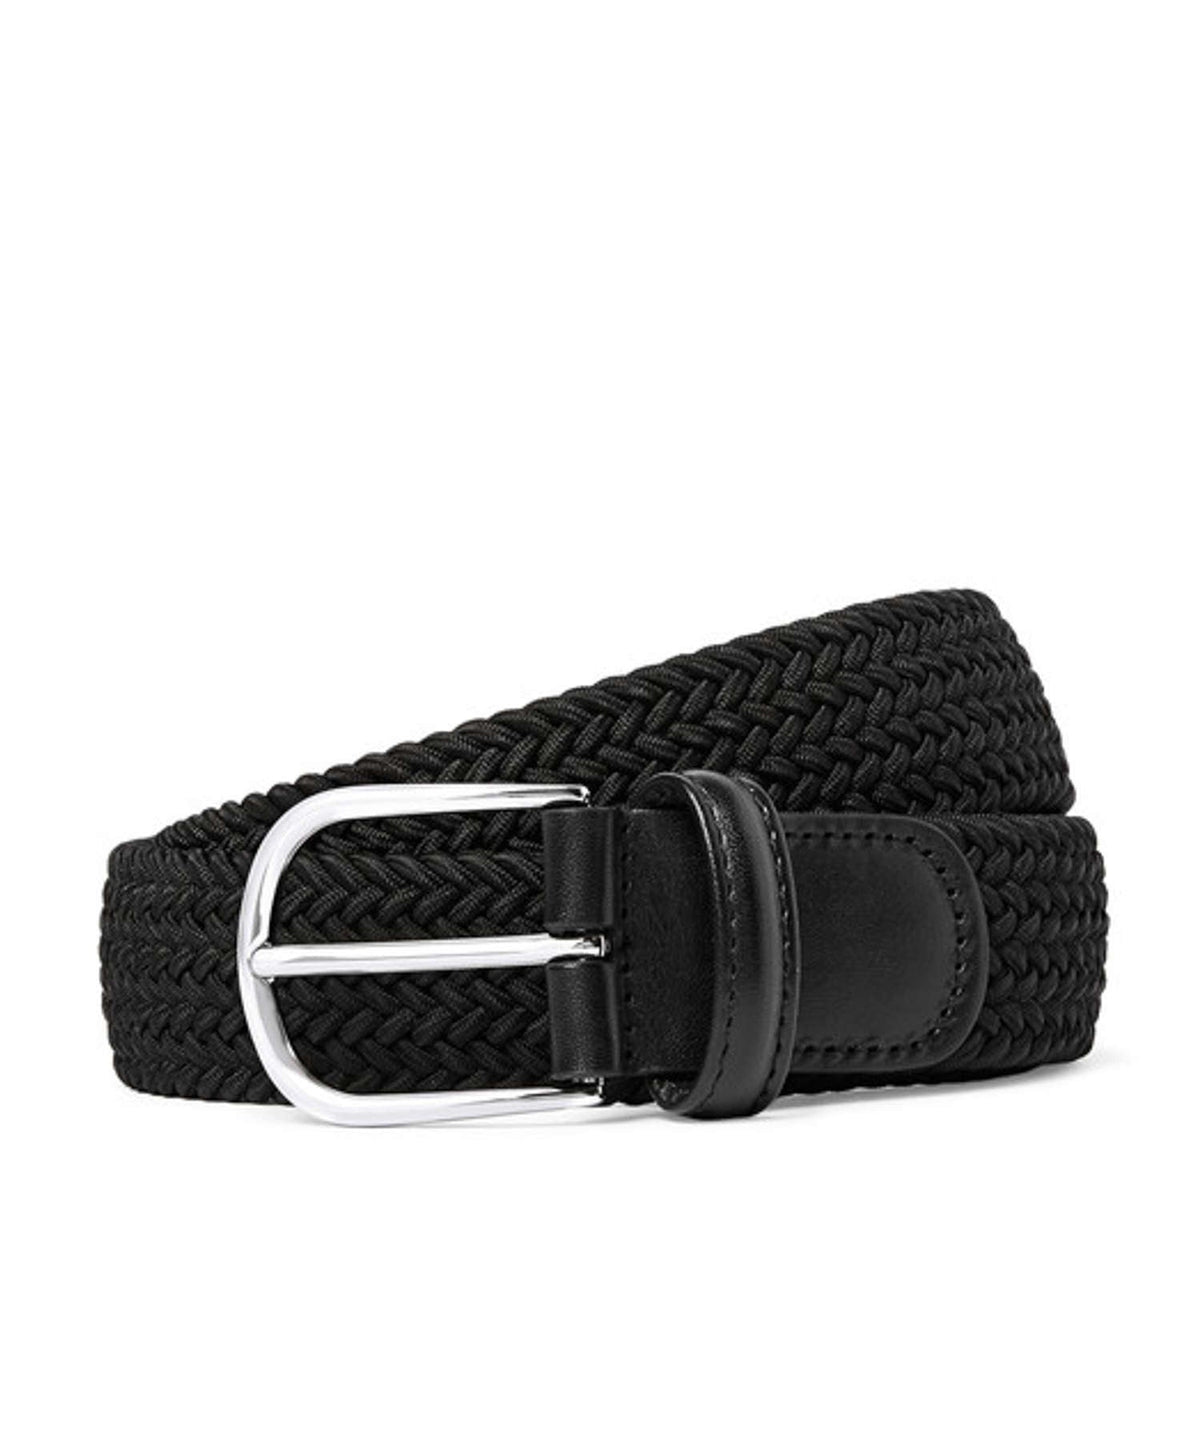 Anderson's Stretch Woven Belt in Black